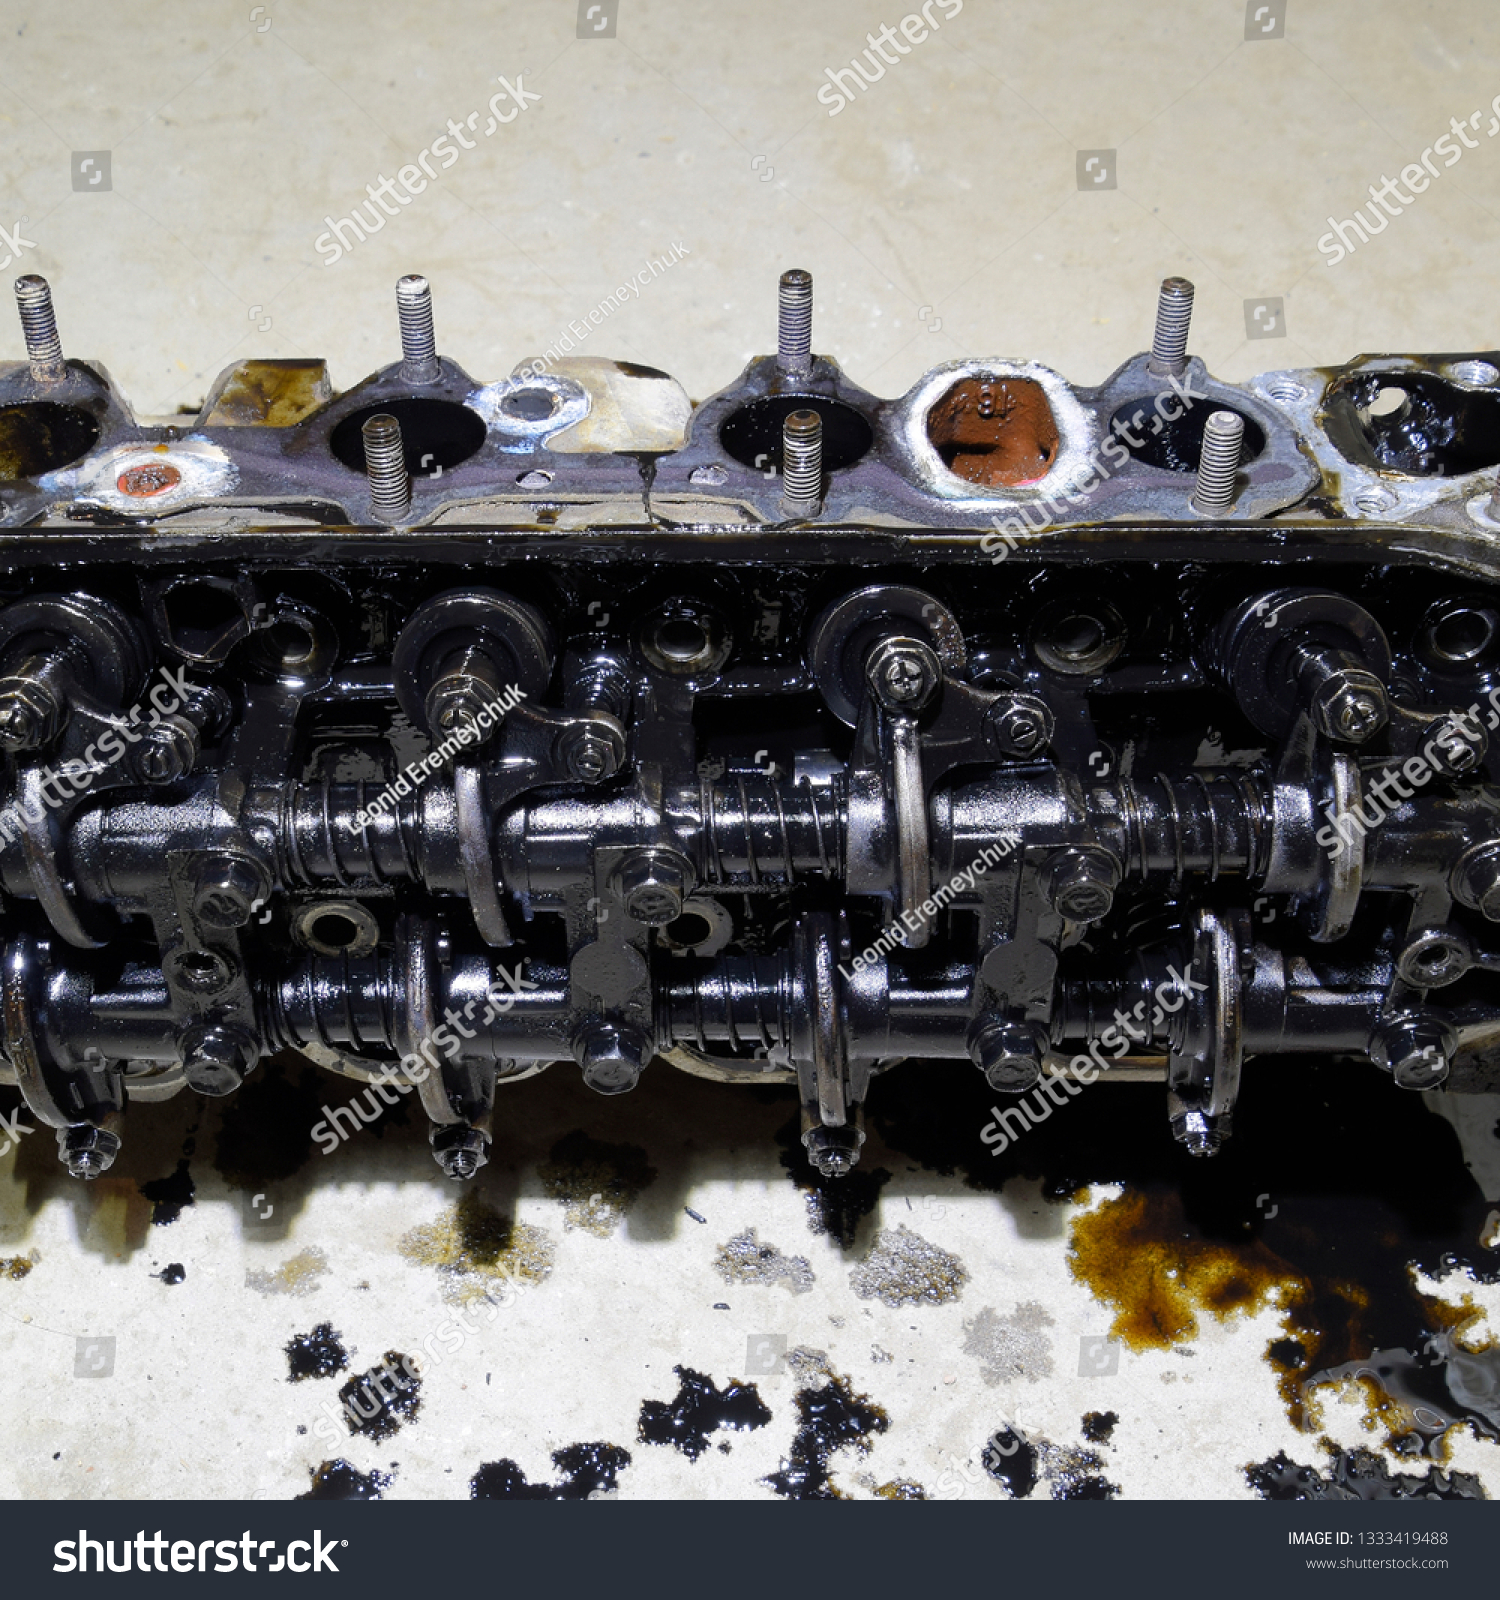 The head of the block of cylinders. The head of the block of cylinders removed from the engine for repair. Parts in engine oil. Car engine repair in the service. #1333419488